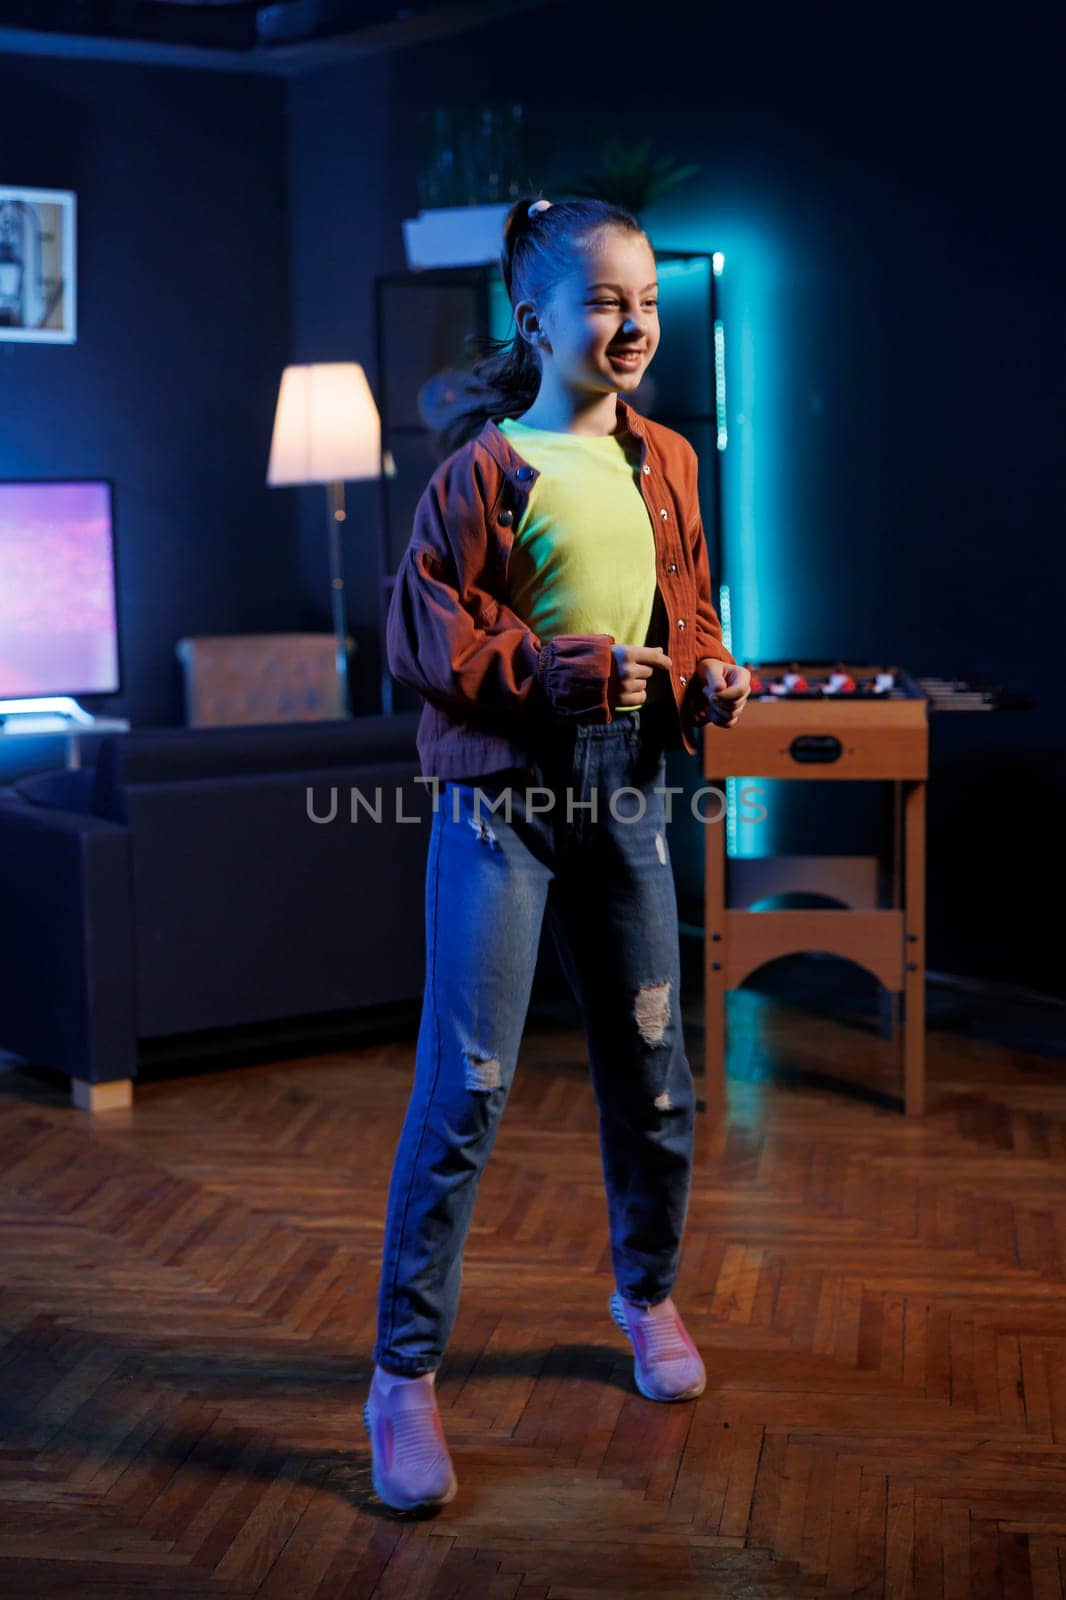 Young girl dancing in dimly lit home studio interior, producing content for online channel. Generation Z youngster doing viral dance choreography in apartment illuminated by RGB lights